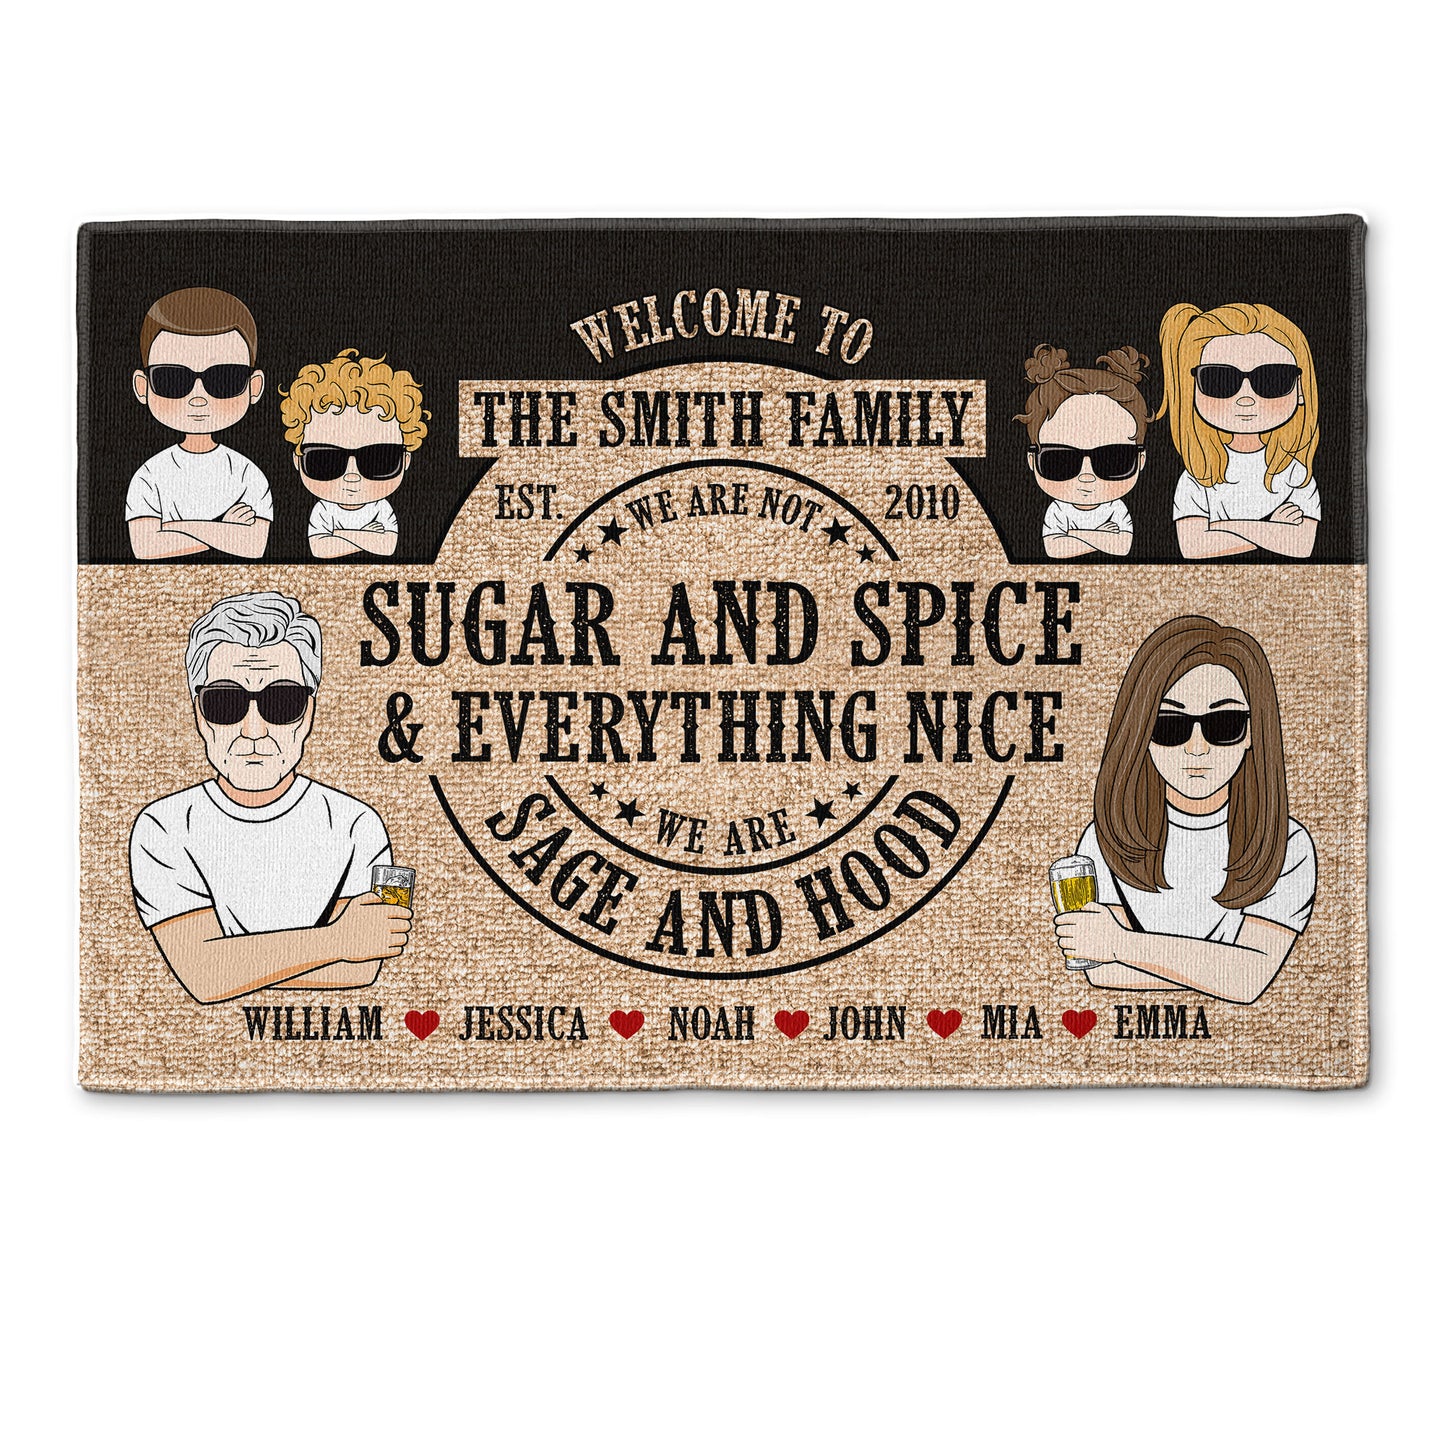 We Are Not Sugar And Spice And Everything Nice - Personalized Doormat